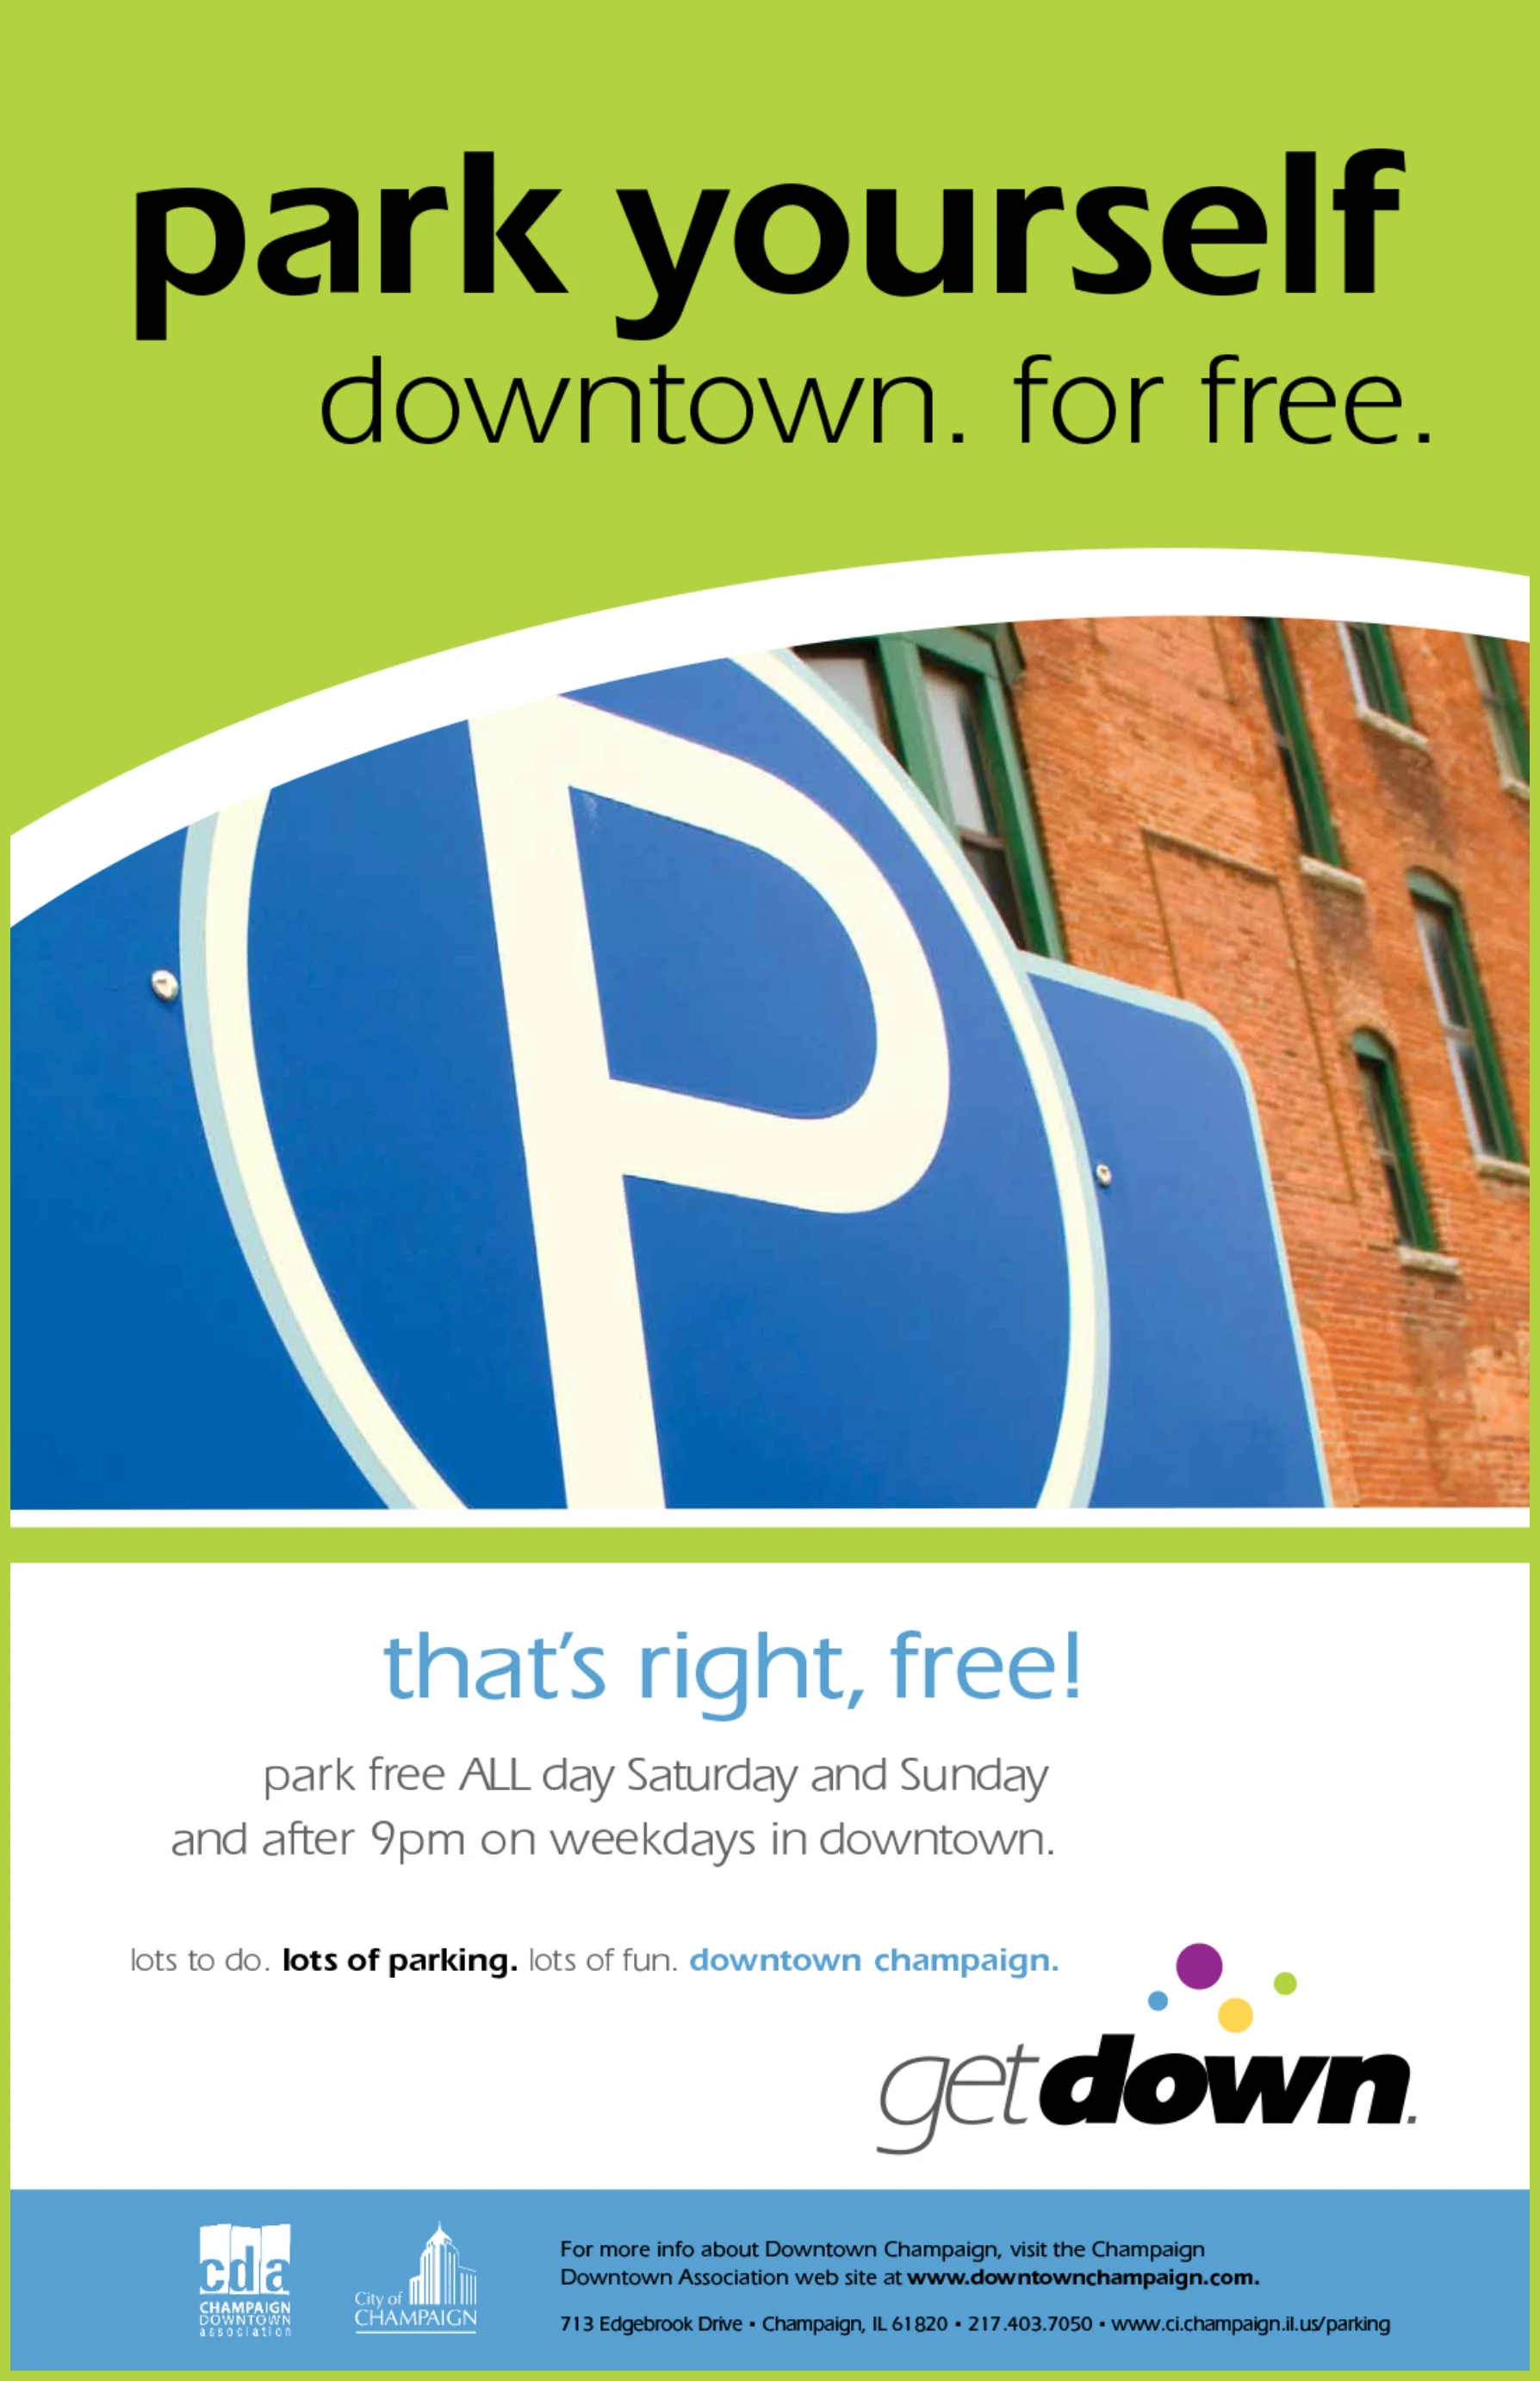 A parking sign with the words park yourself downtown free.